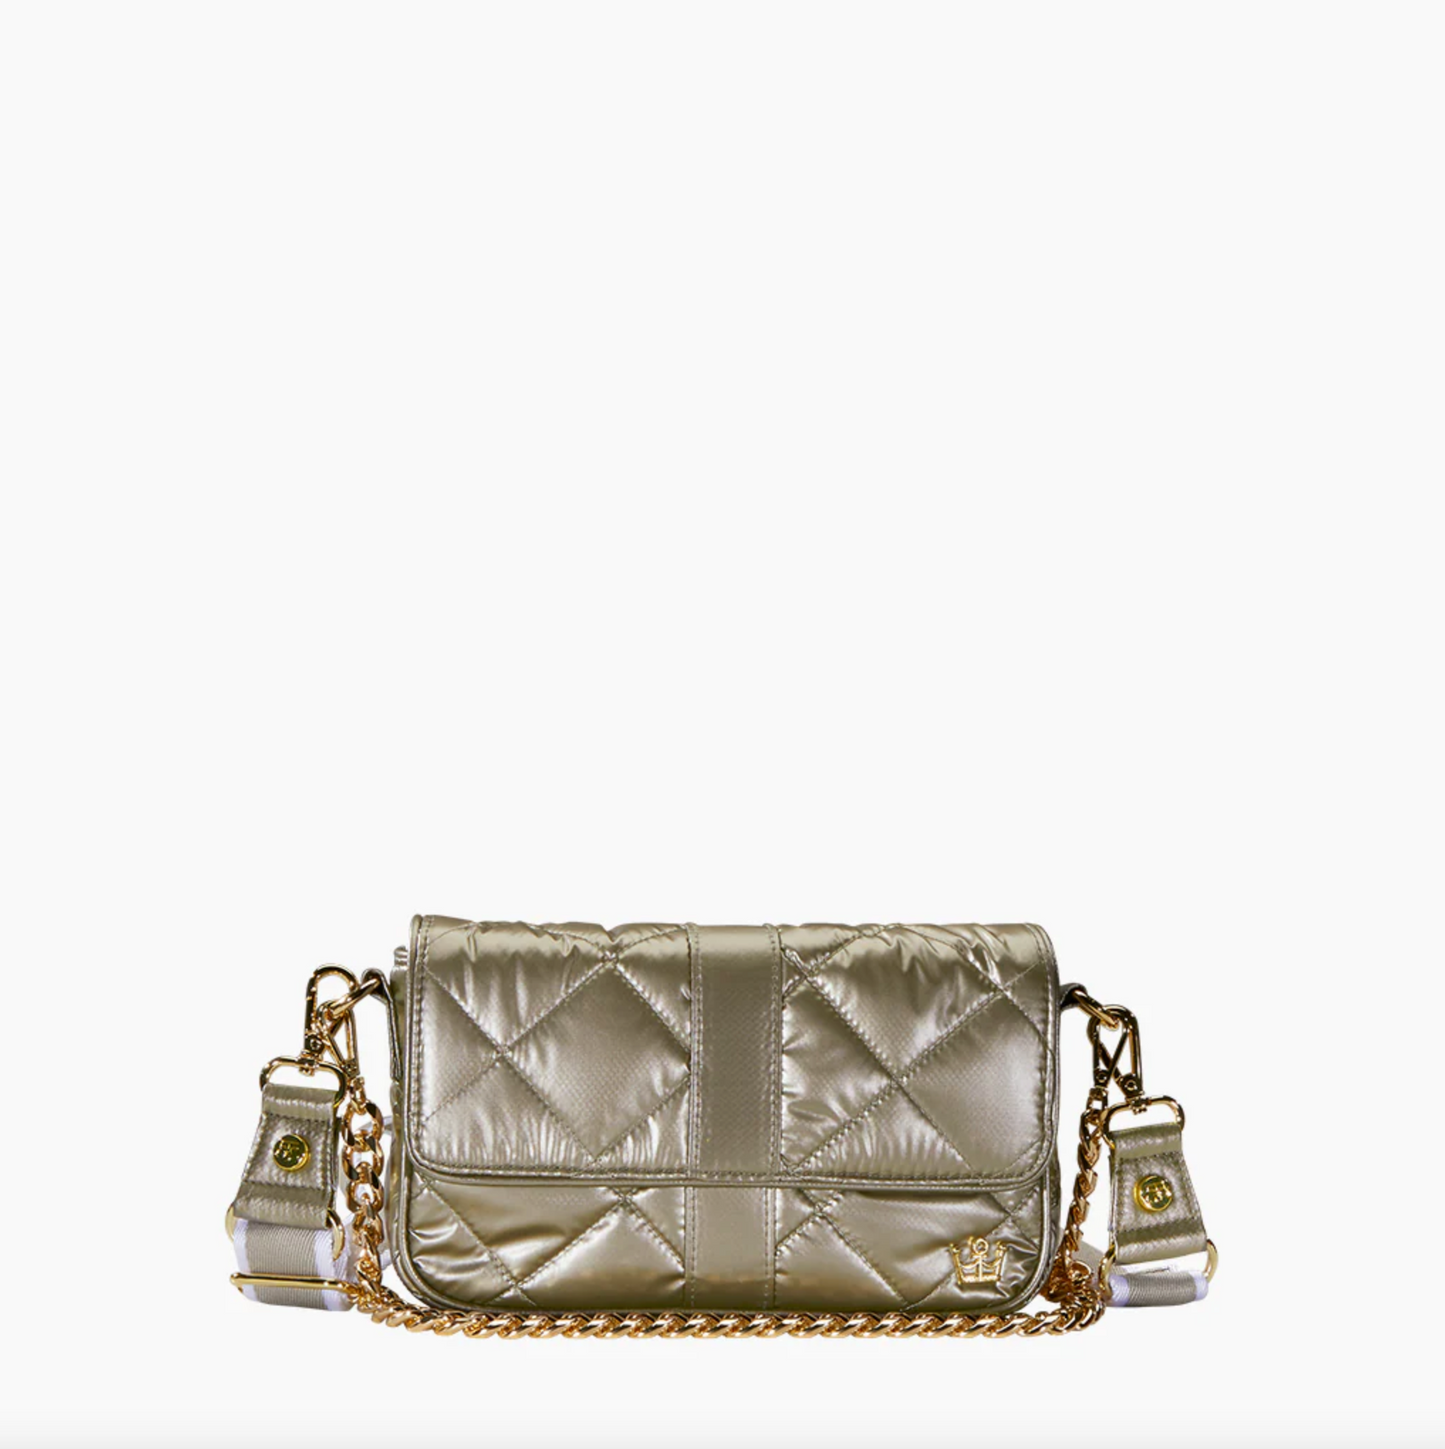 Oliver Thomas Bestie Baguette Handbags in Modern Taupe at Wrapsody